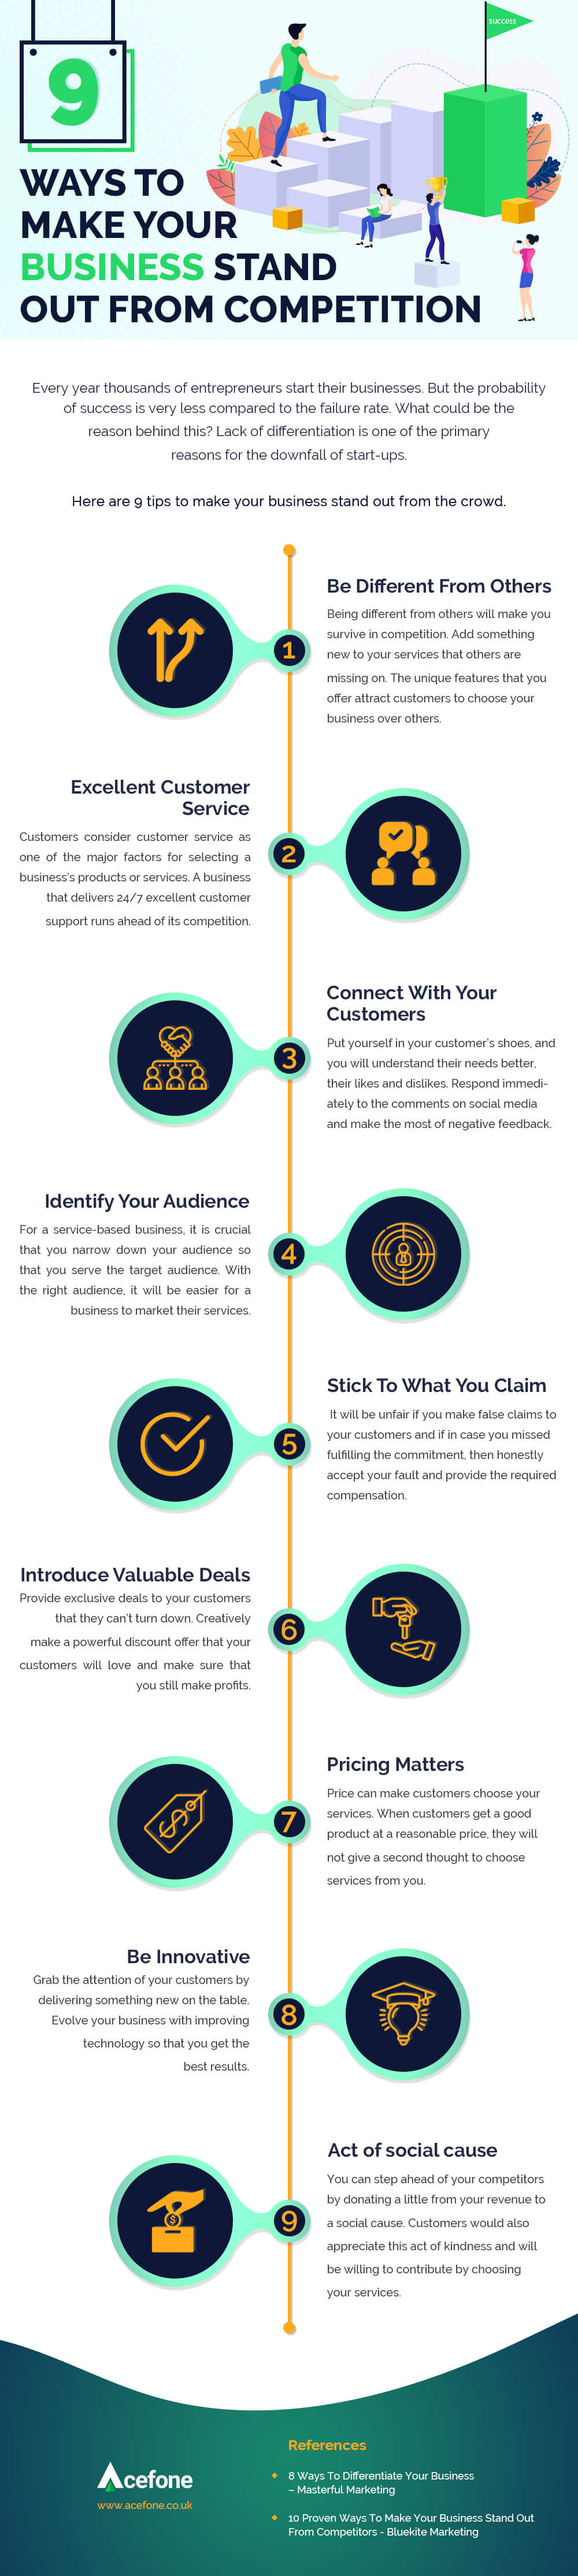 9 Ways to make Your Business Stand Out From Competition - Infographic